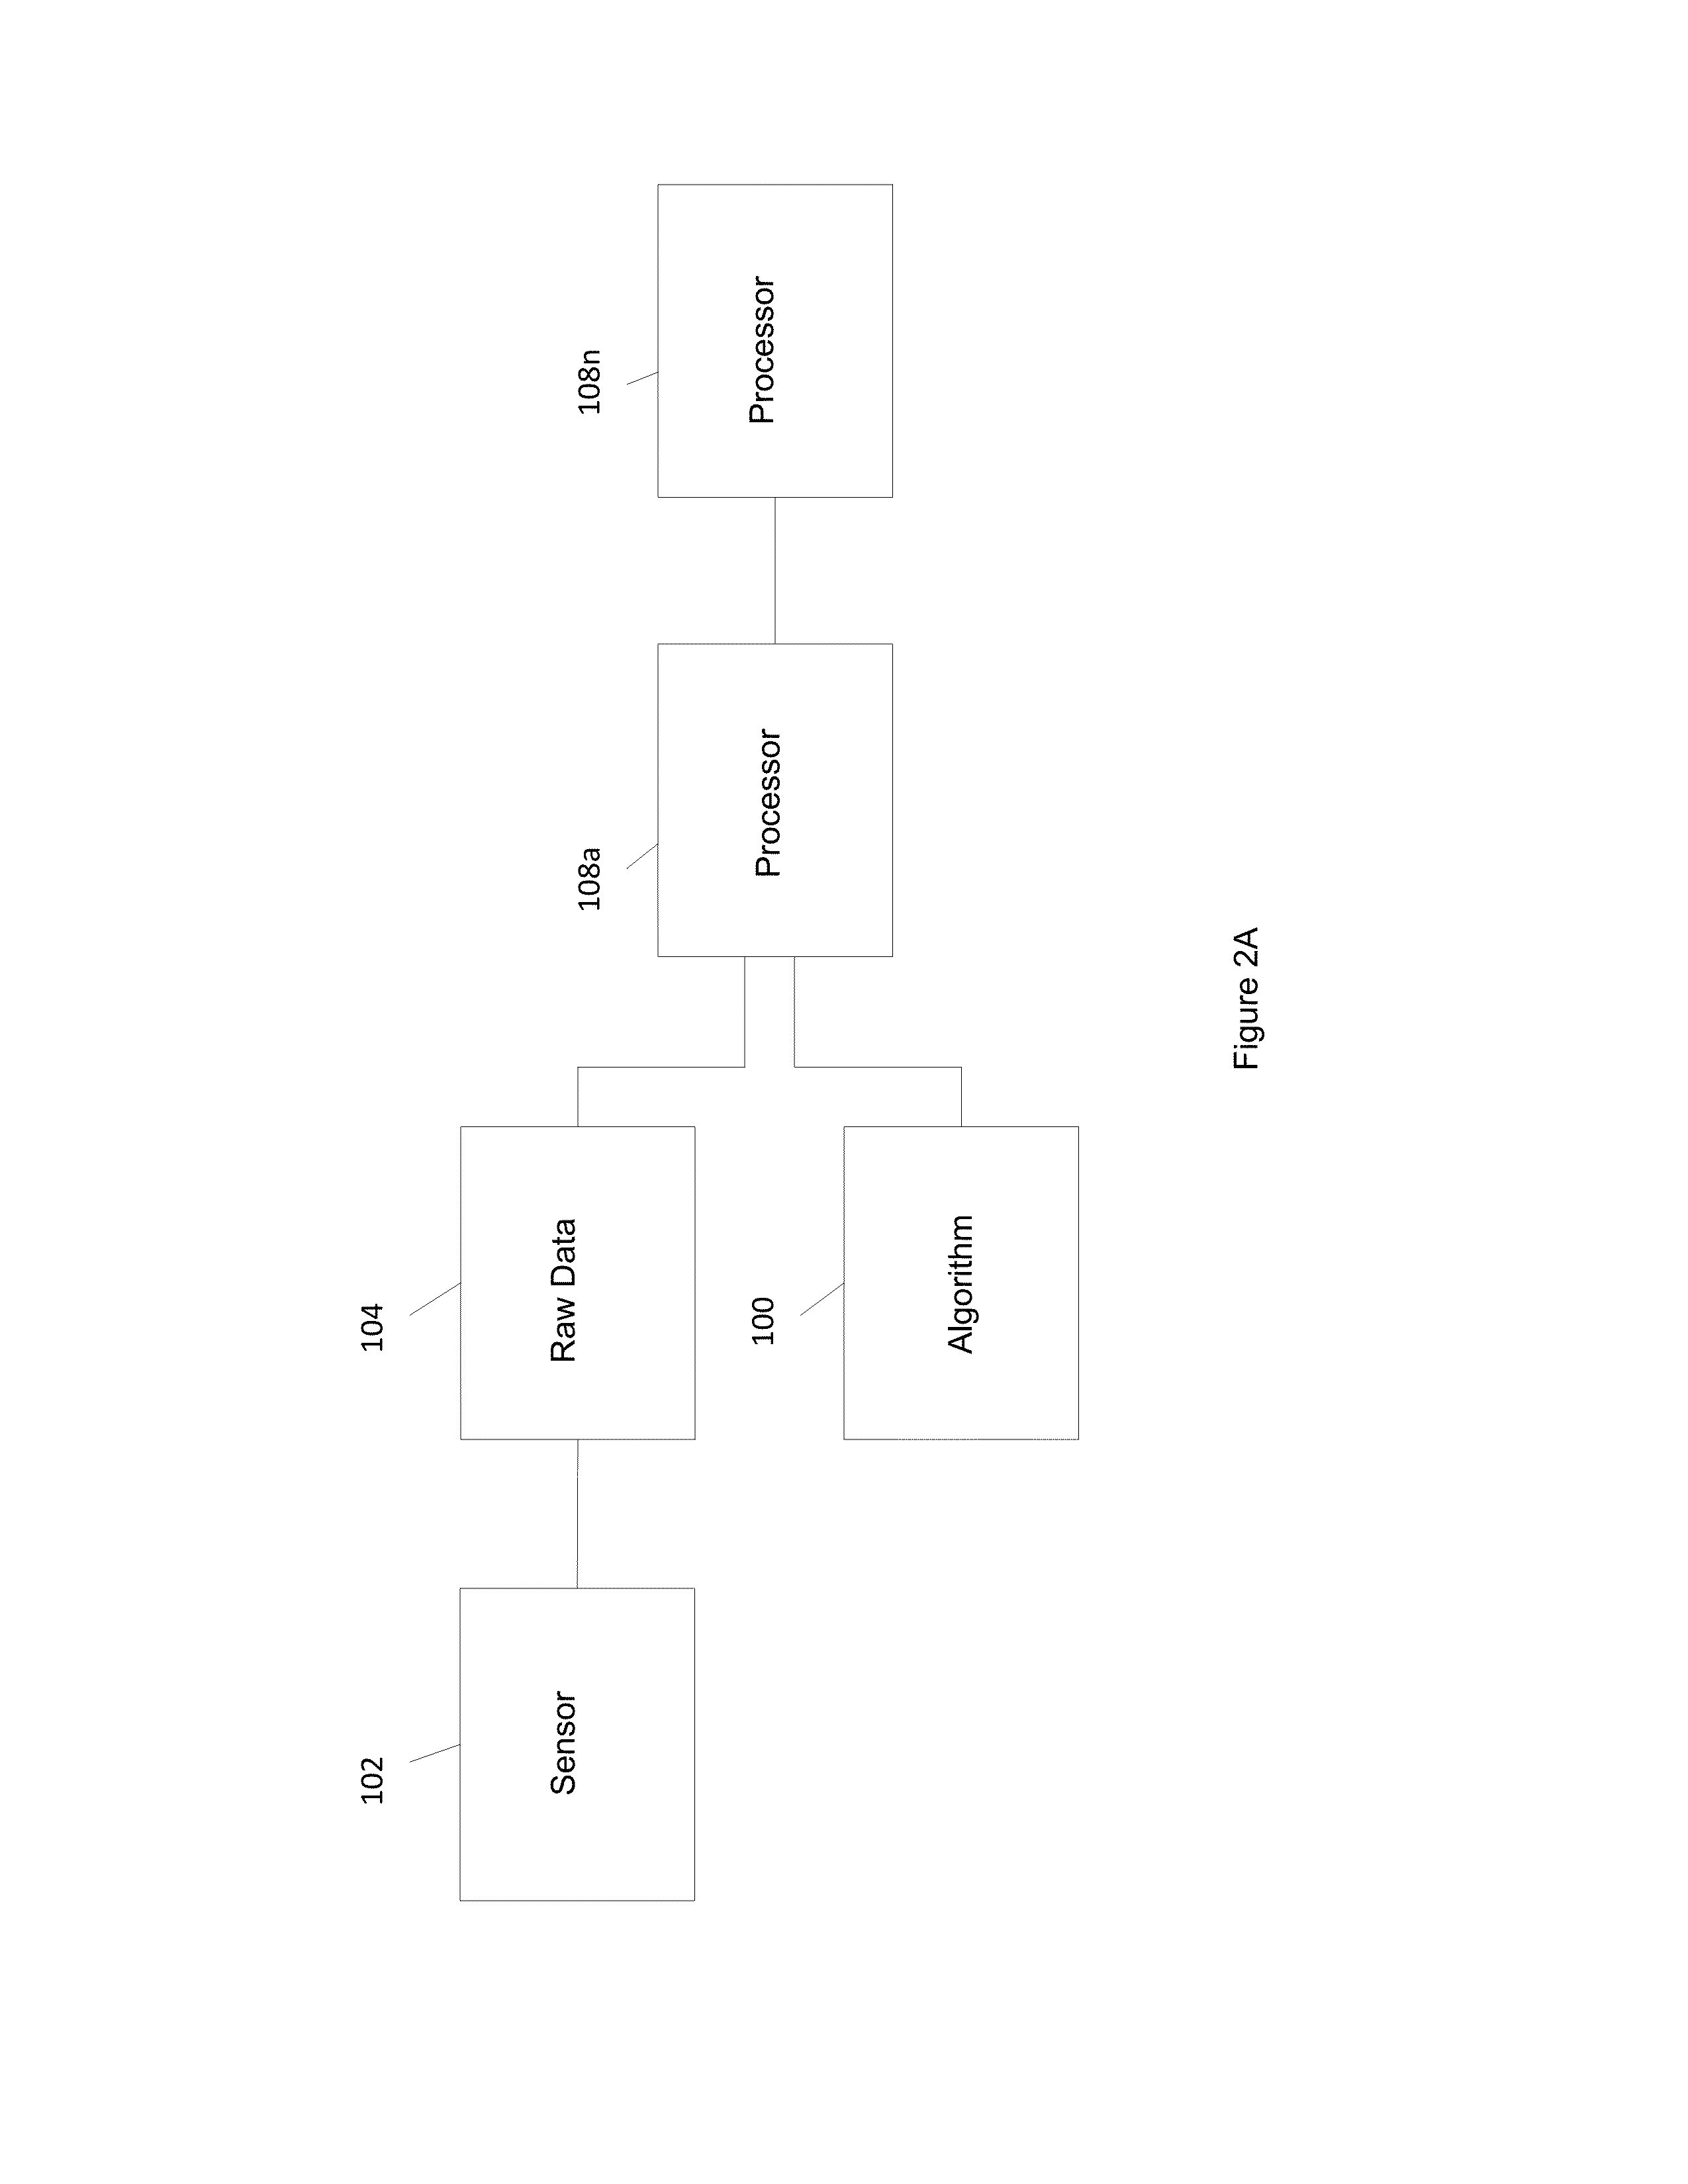 Activity classification in a multi-axis activity monitor device